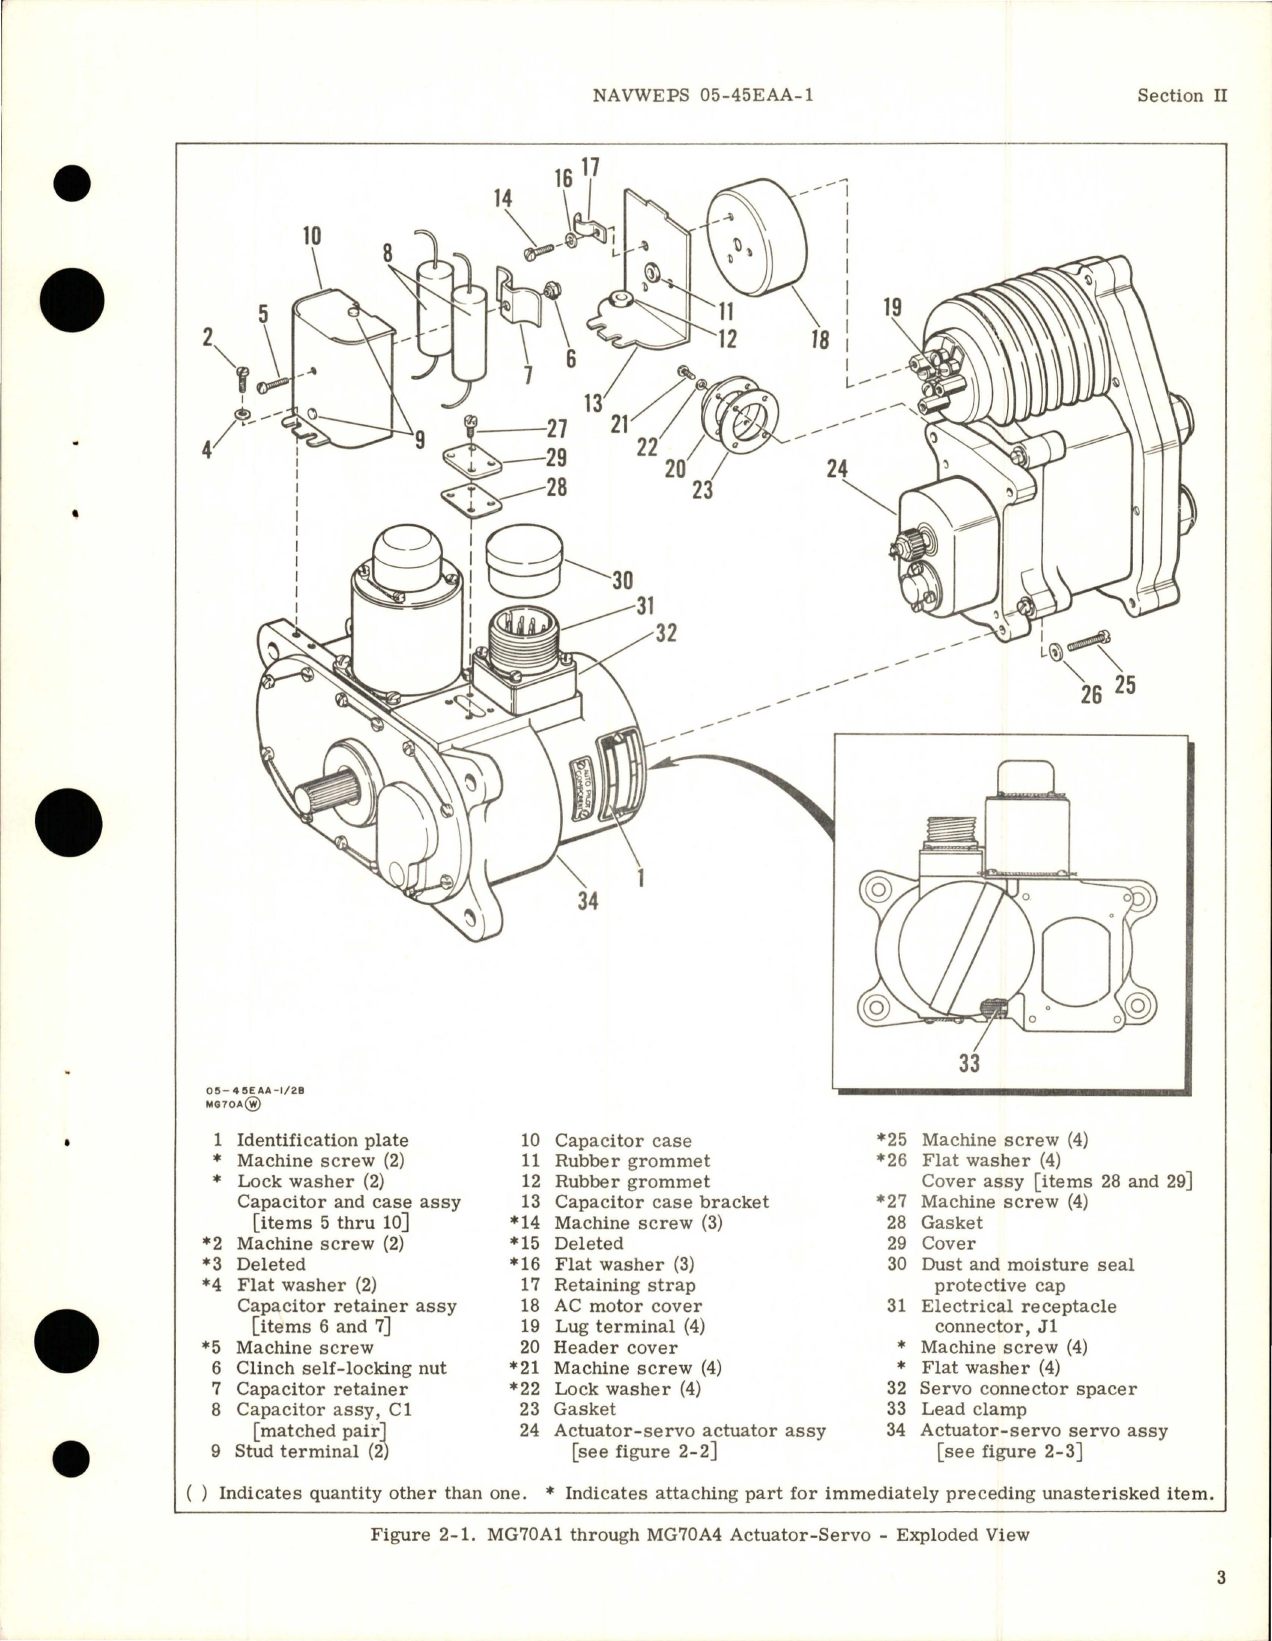 Sample page 7 from AirCorps Library document: Overhaul Instructions for Servo Actuator - Parts MG70A1, MG70A2, MG70A3, and MG70A4